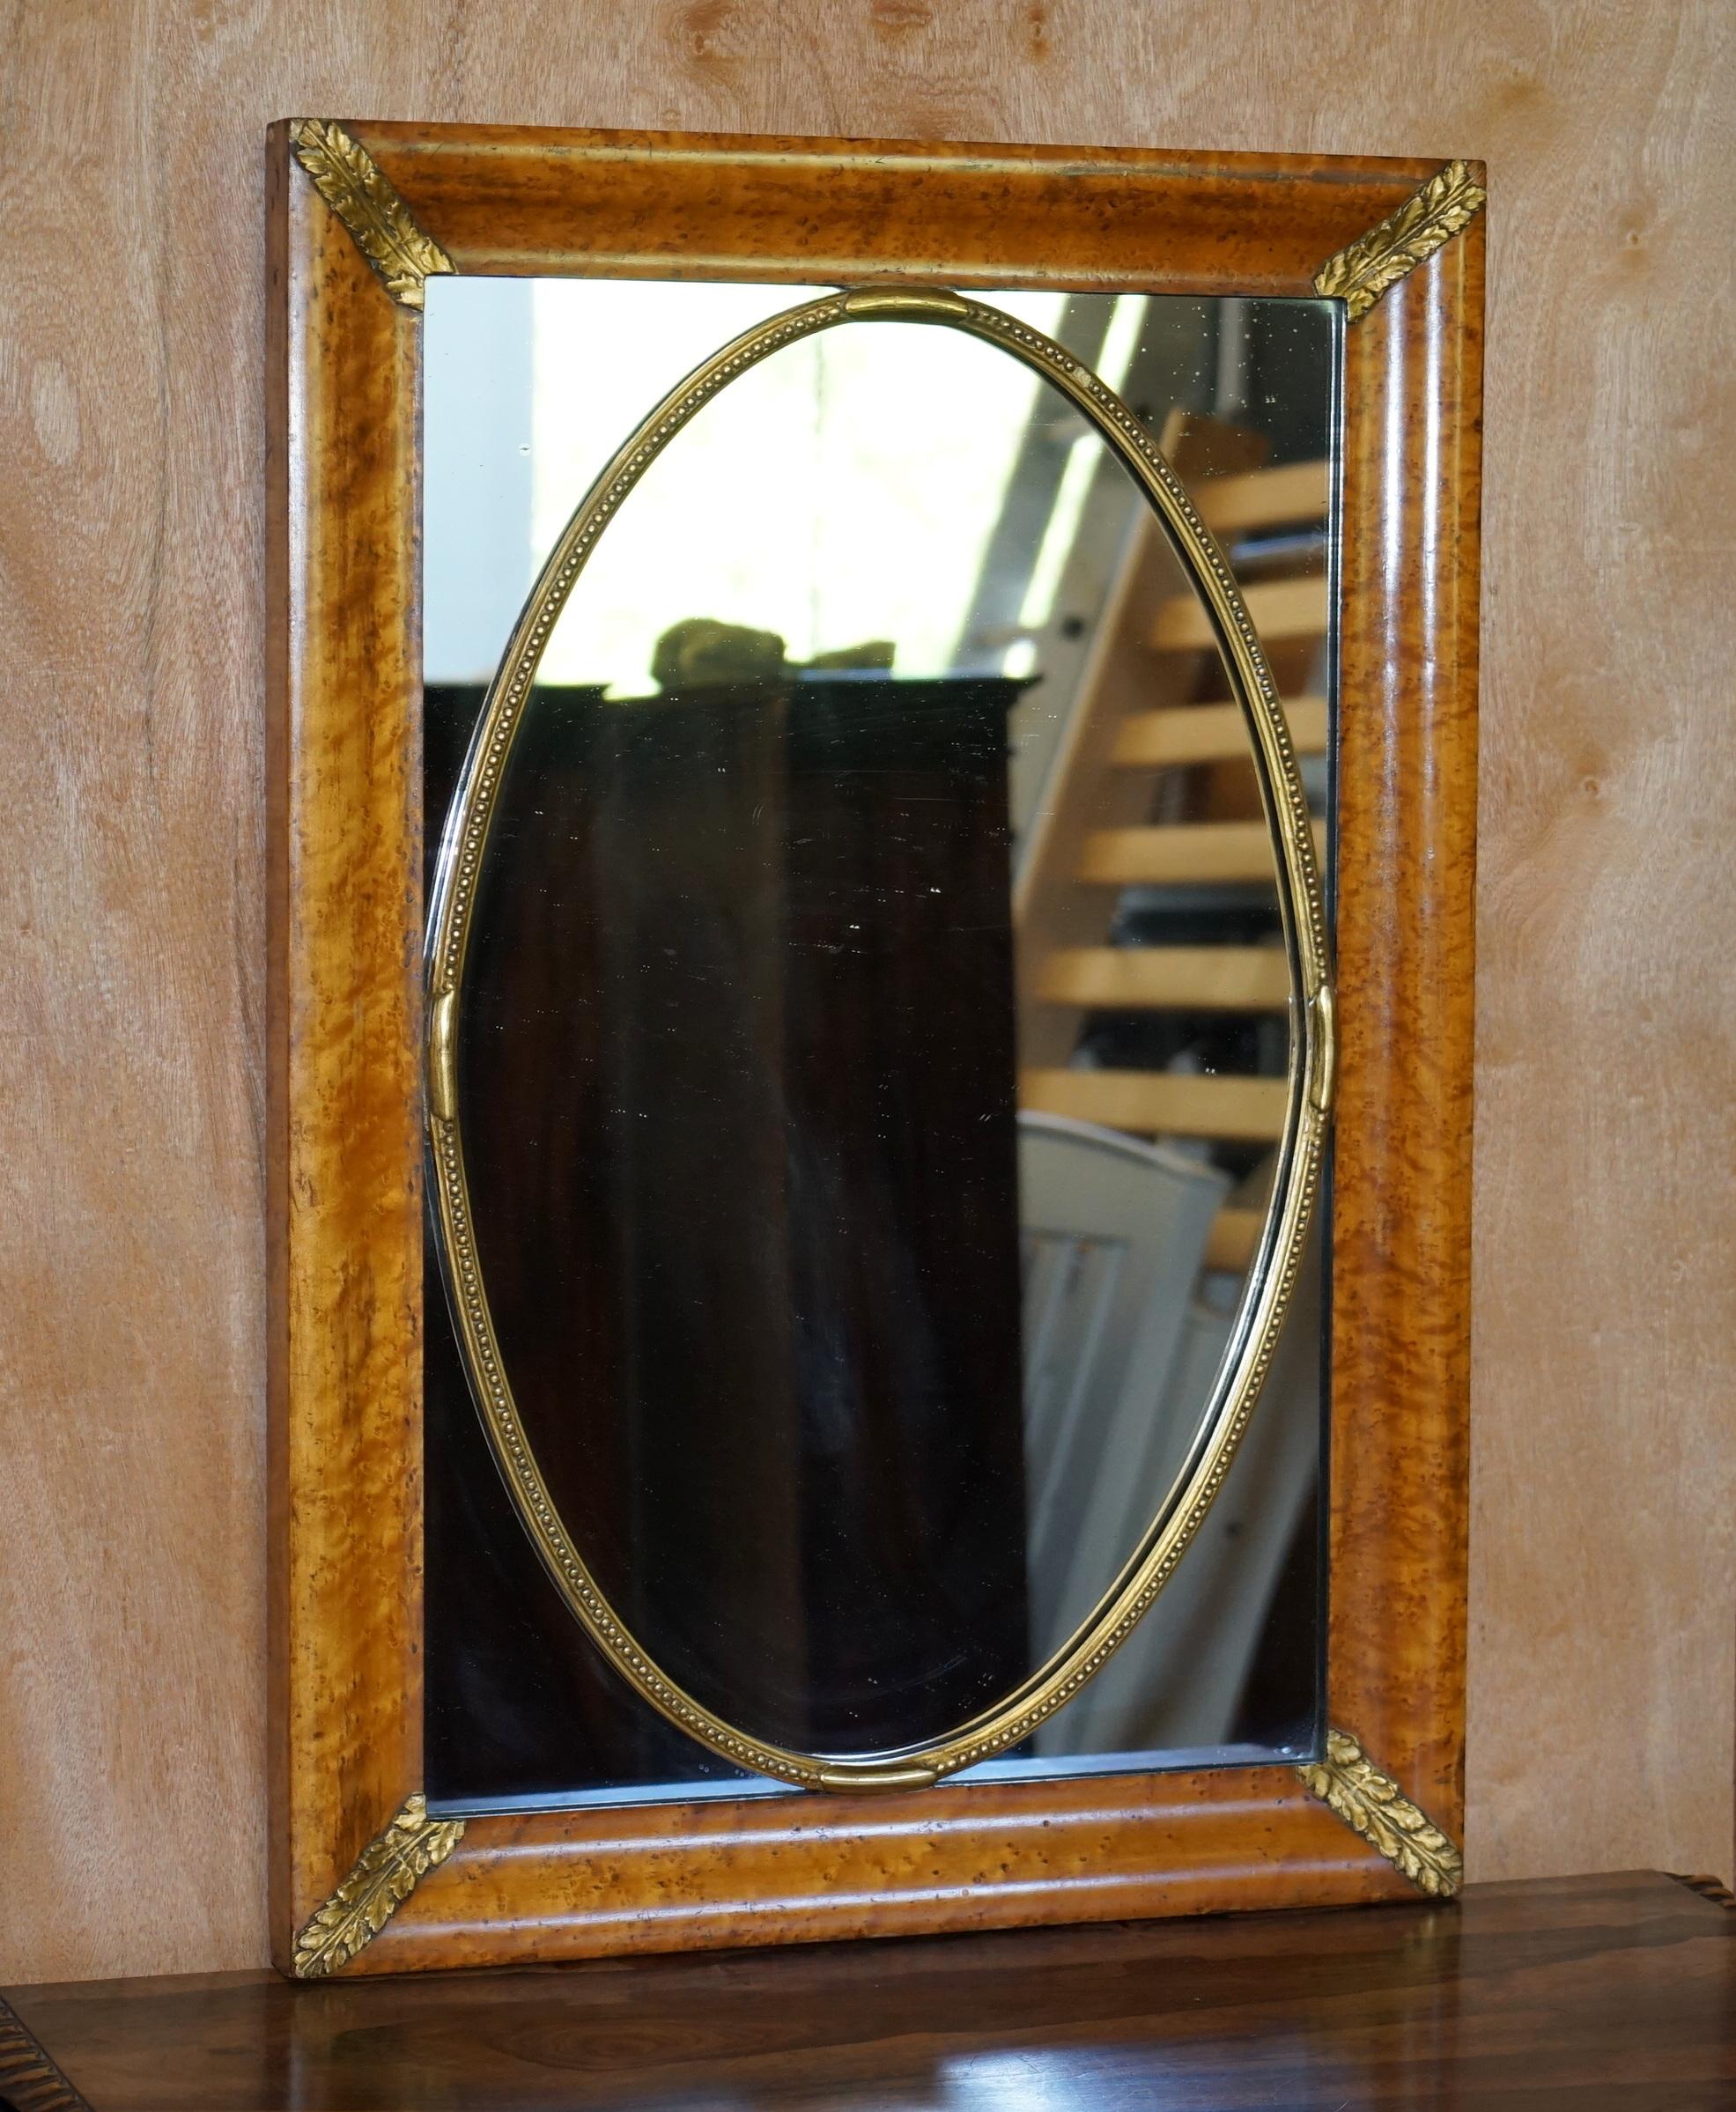 We are delighted to offer this stunning hand made circa 1860 French burr walnut wall mirror with gold leaf giltwood details

A very decorative and fine French 19th century mirror. This piece looks sublime from every angle, it has a real